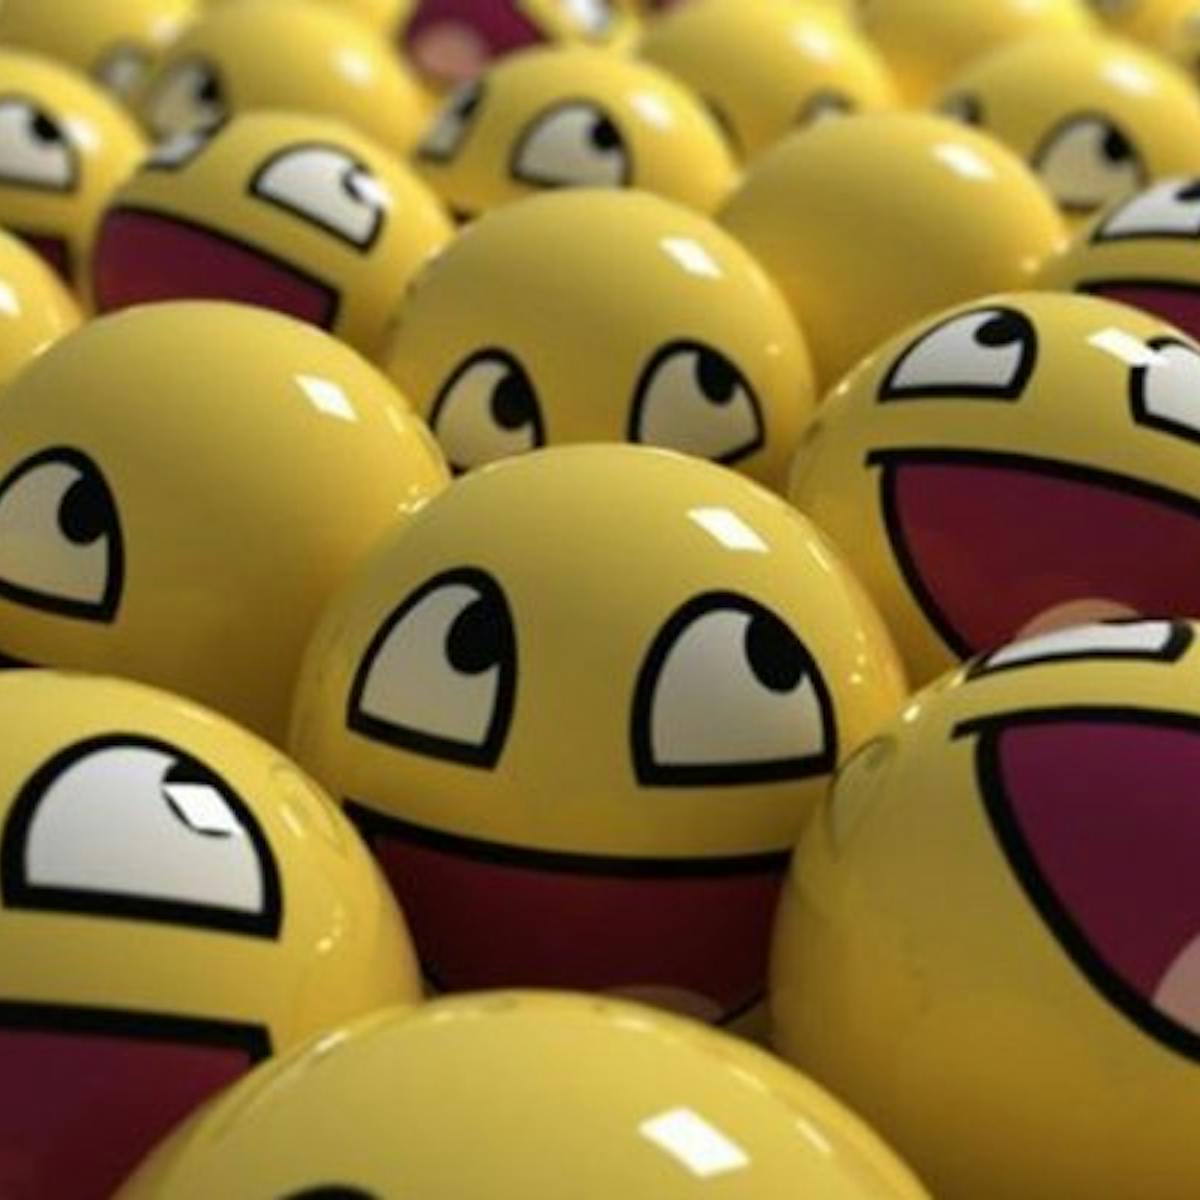 Cracking jokes: four rules for humour